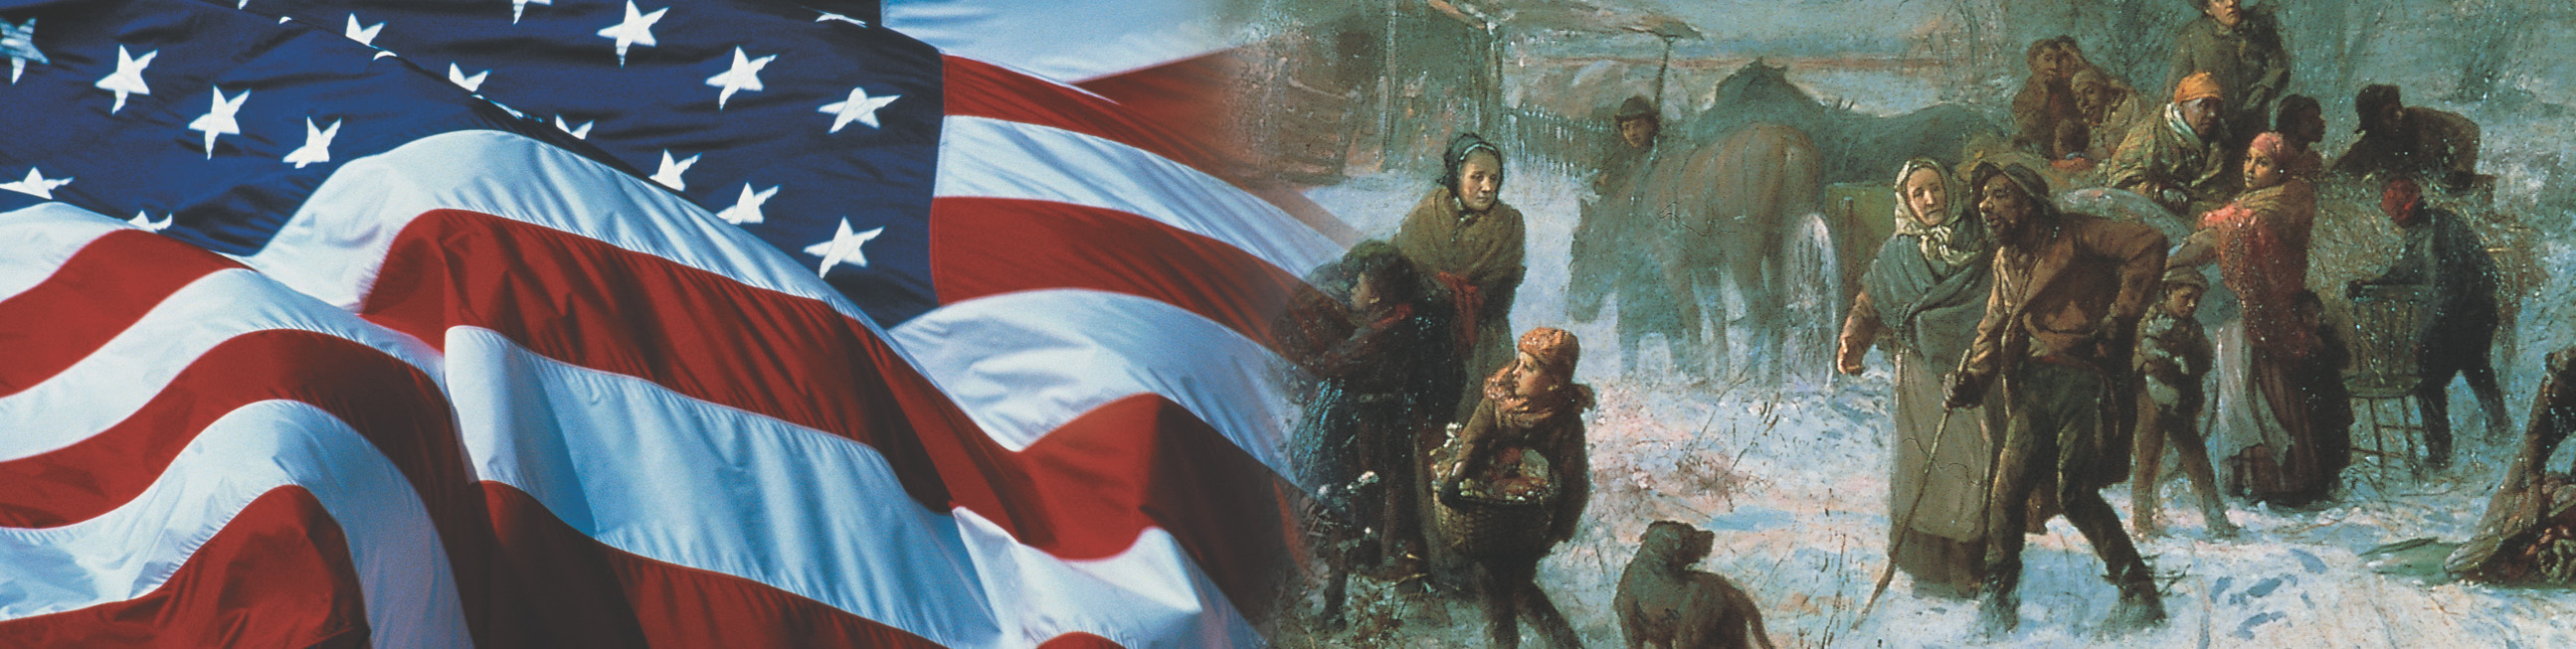 Banner: an American flag billows and a painting of families trudging through snow.